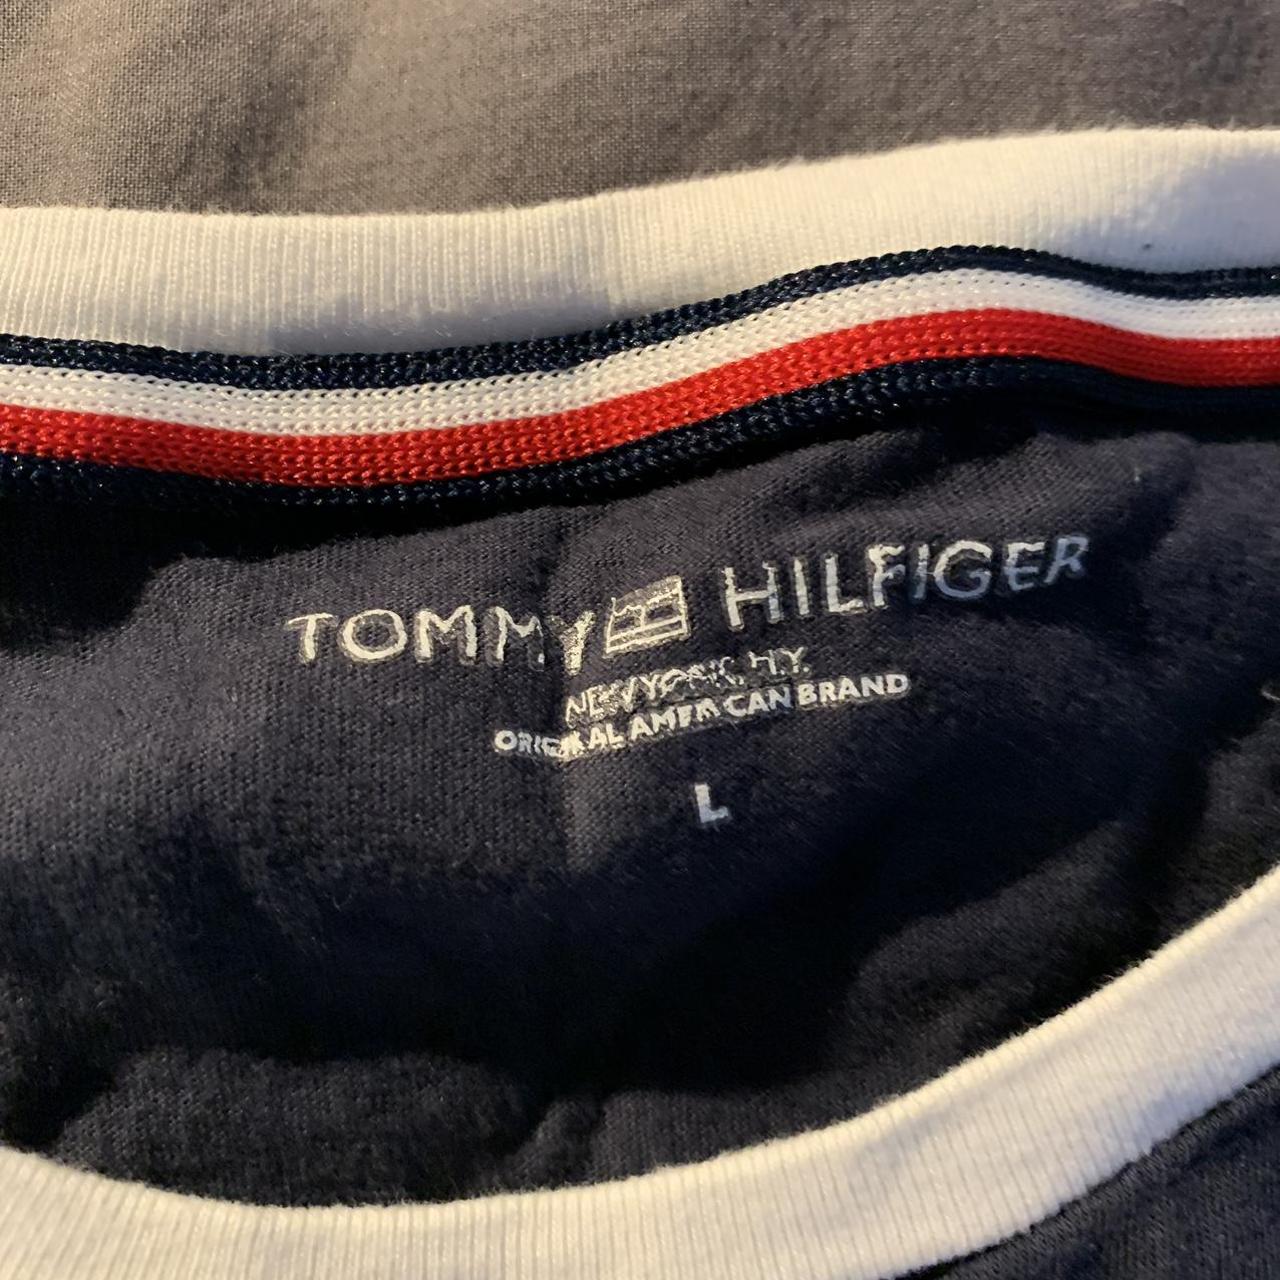 Tommy Hilfiger navy blue tshirt 8/10 condition RRP... - Depop